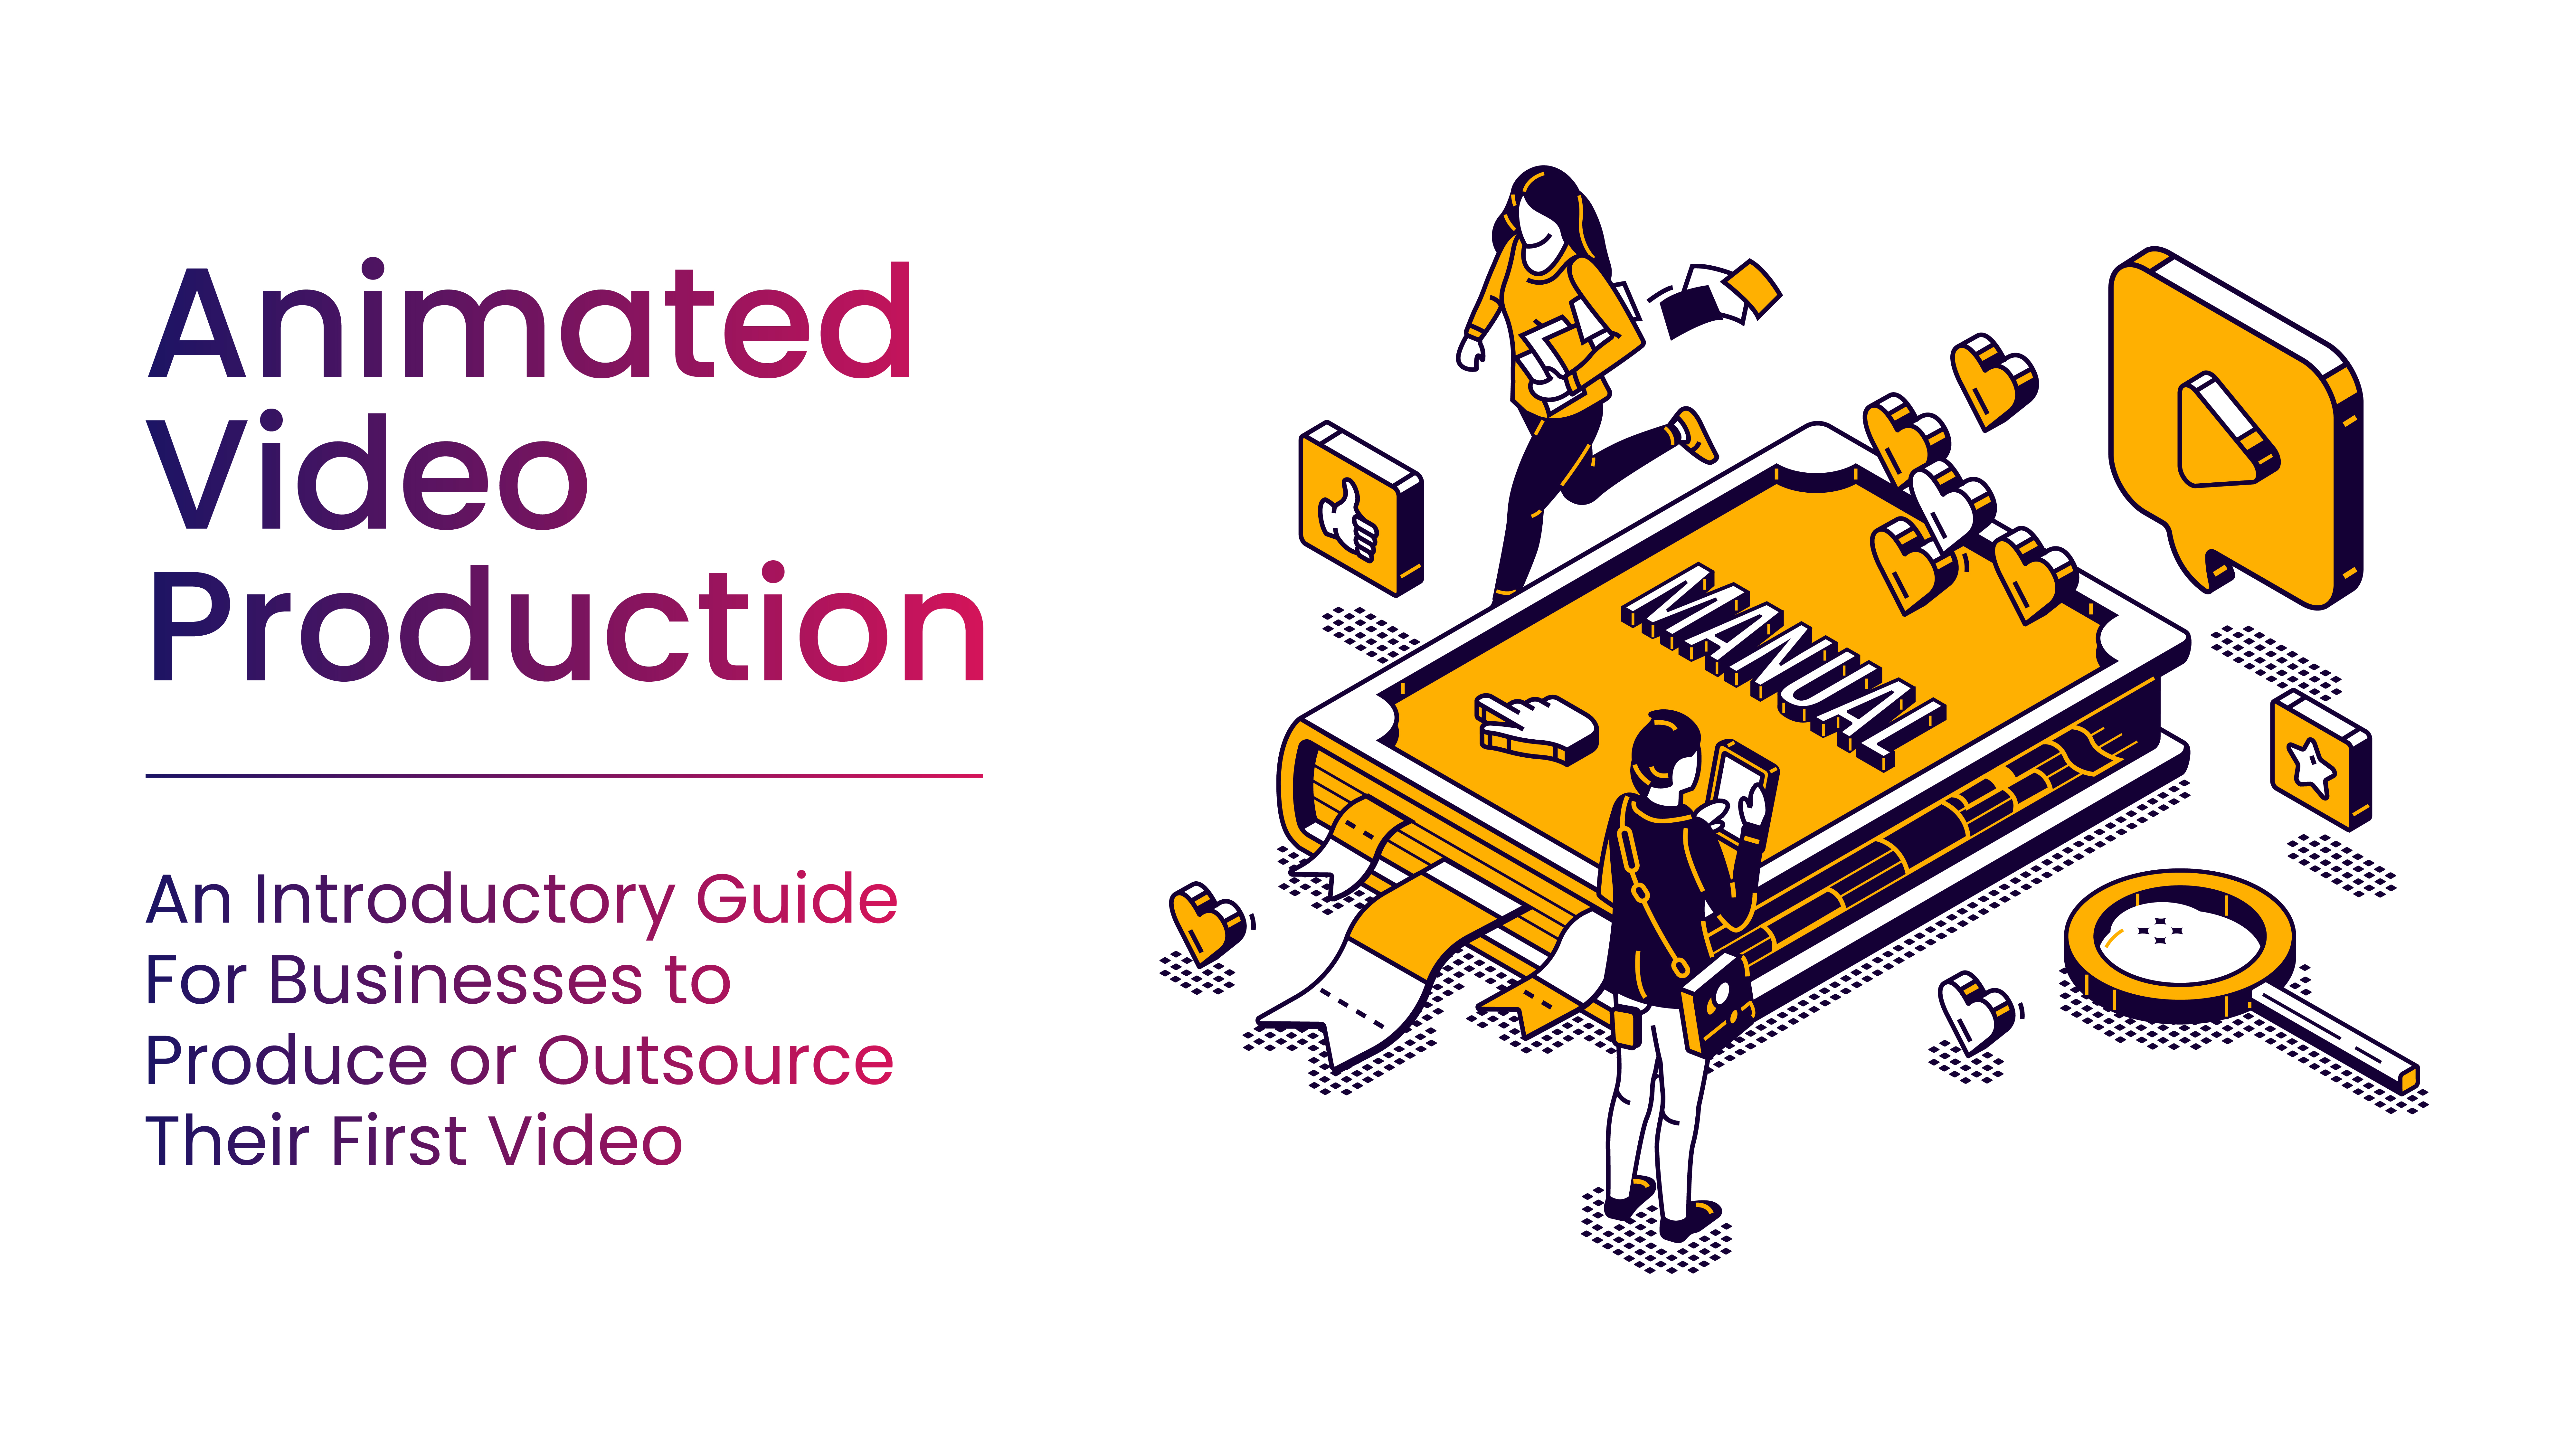 Animated Video Production: An Introductory Guide For Businesses to Produce or Outsource Their First Animated Video